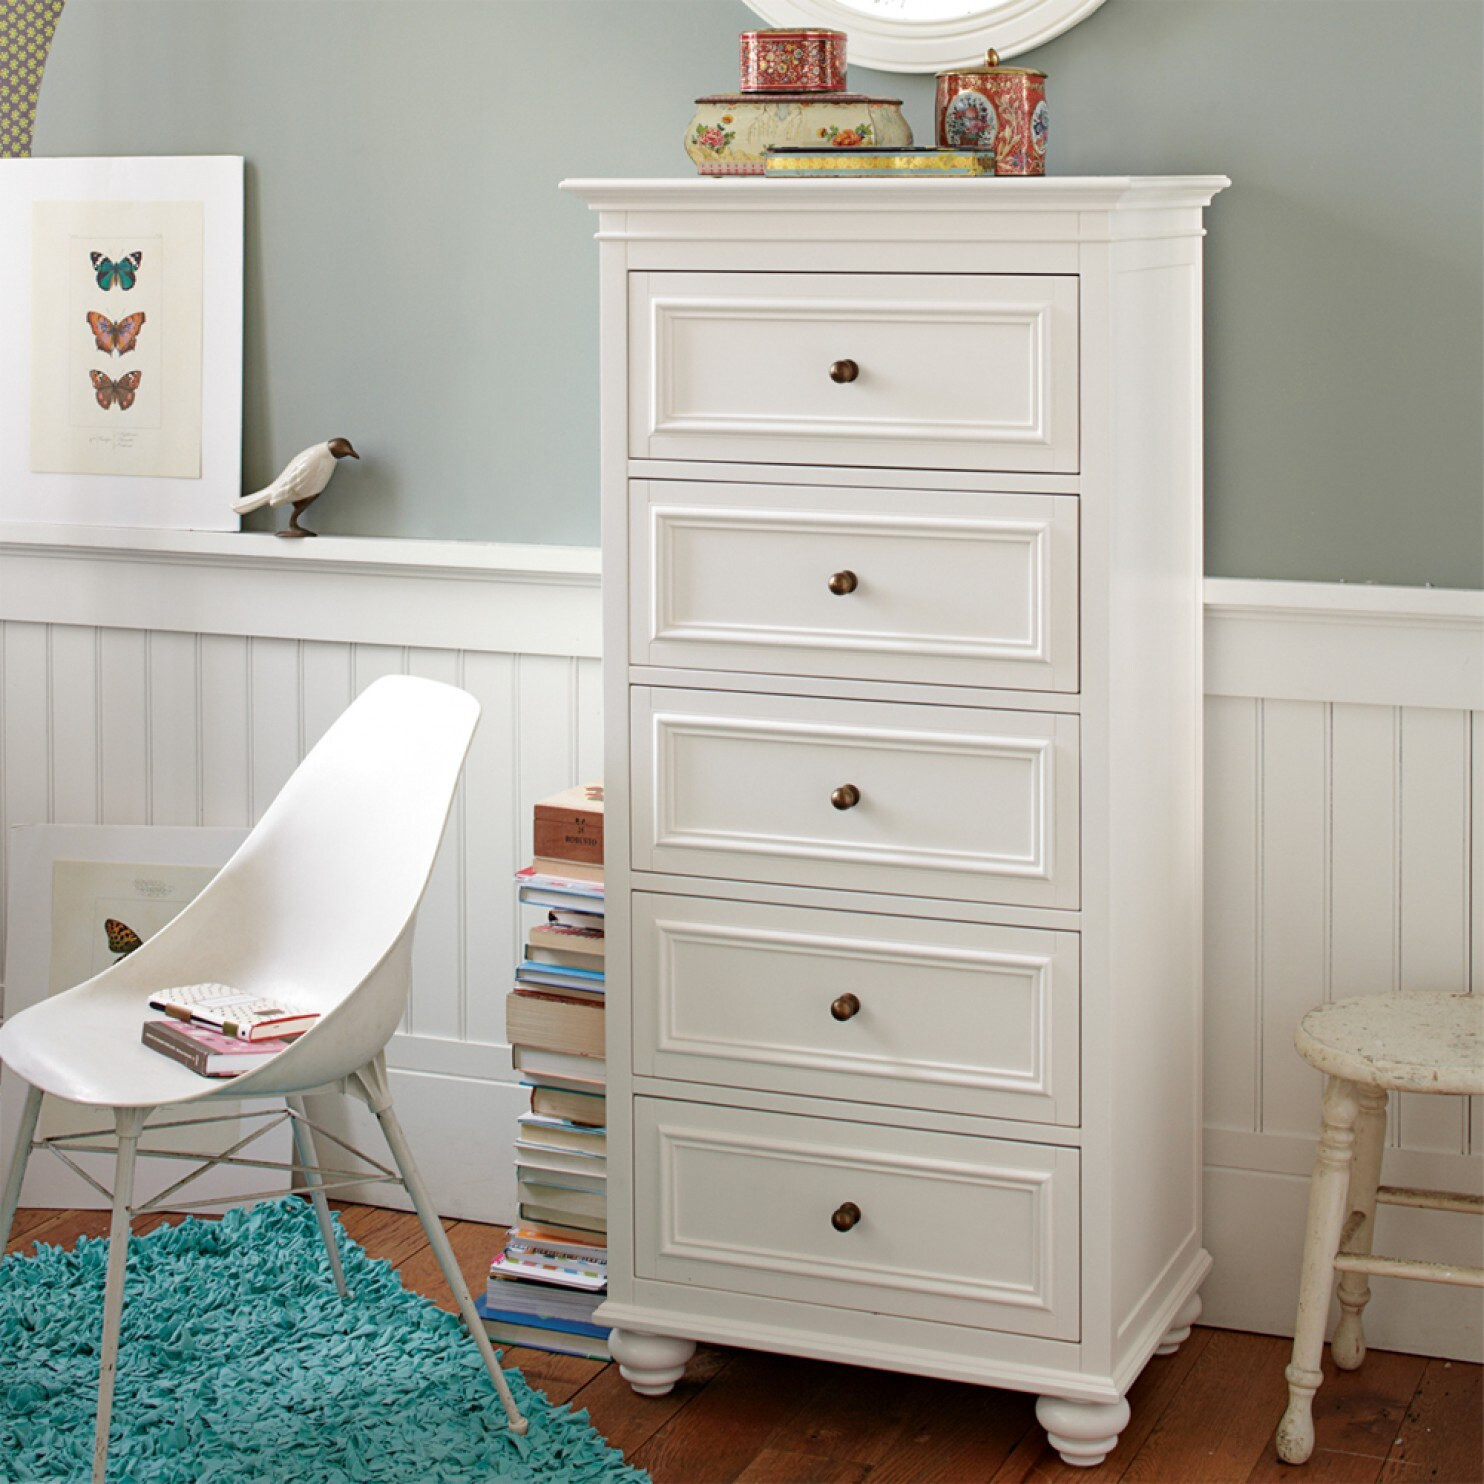 Dresser For Small Bedroom
 Creative dresser options for small spaces The Washington